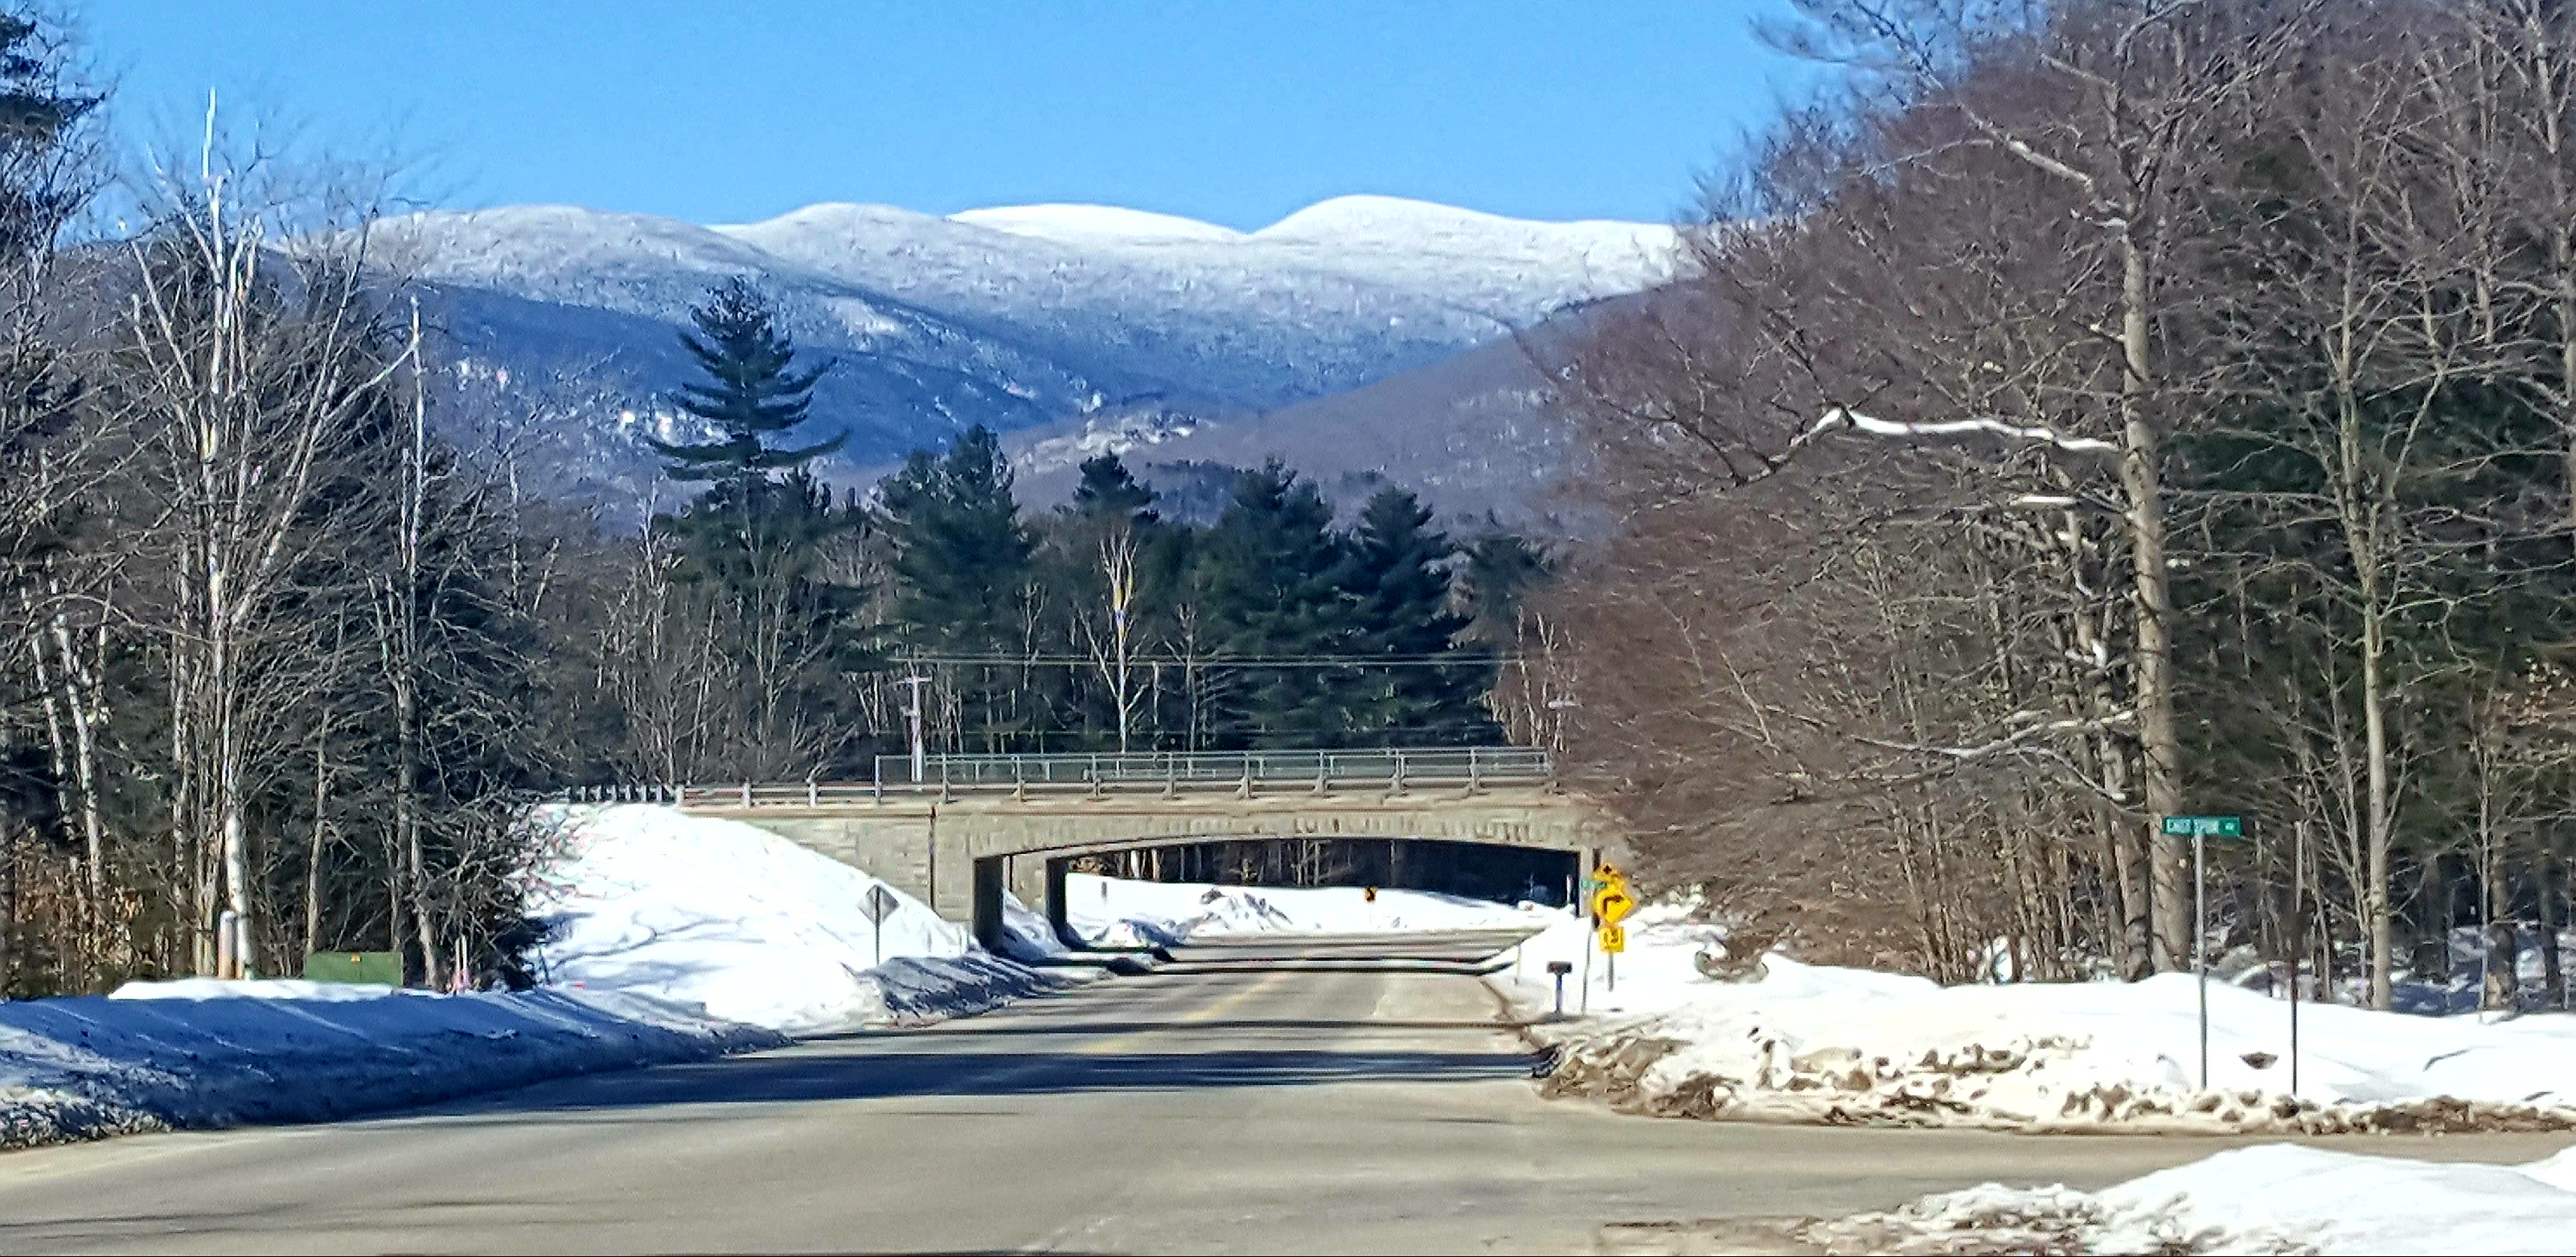 Connector road, bridge and mountains.